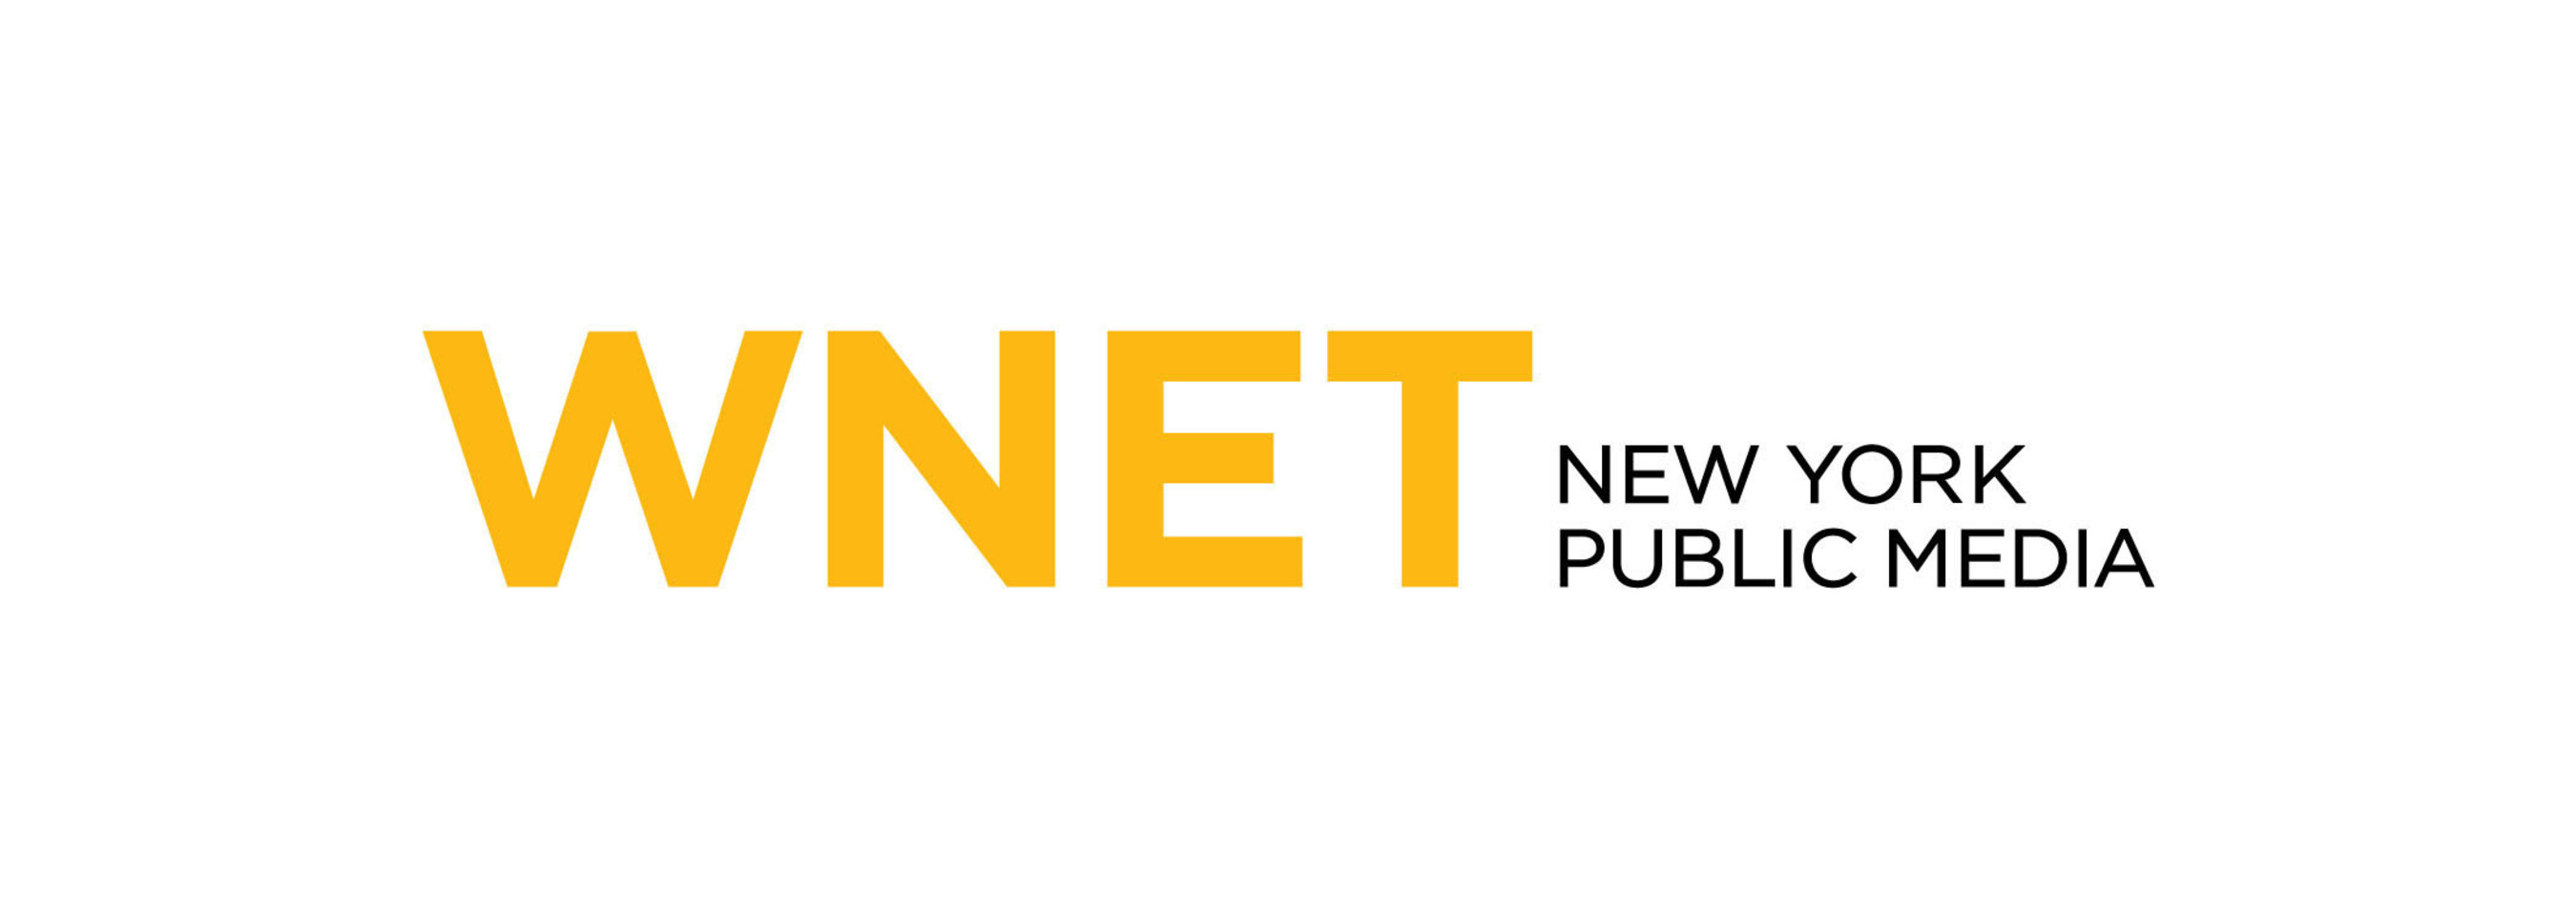 WNET is New York's flagship PBS station. (PRNewsFoto/WNET) (PRNewsFoto/THIRTEEN/WNET New York)